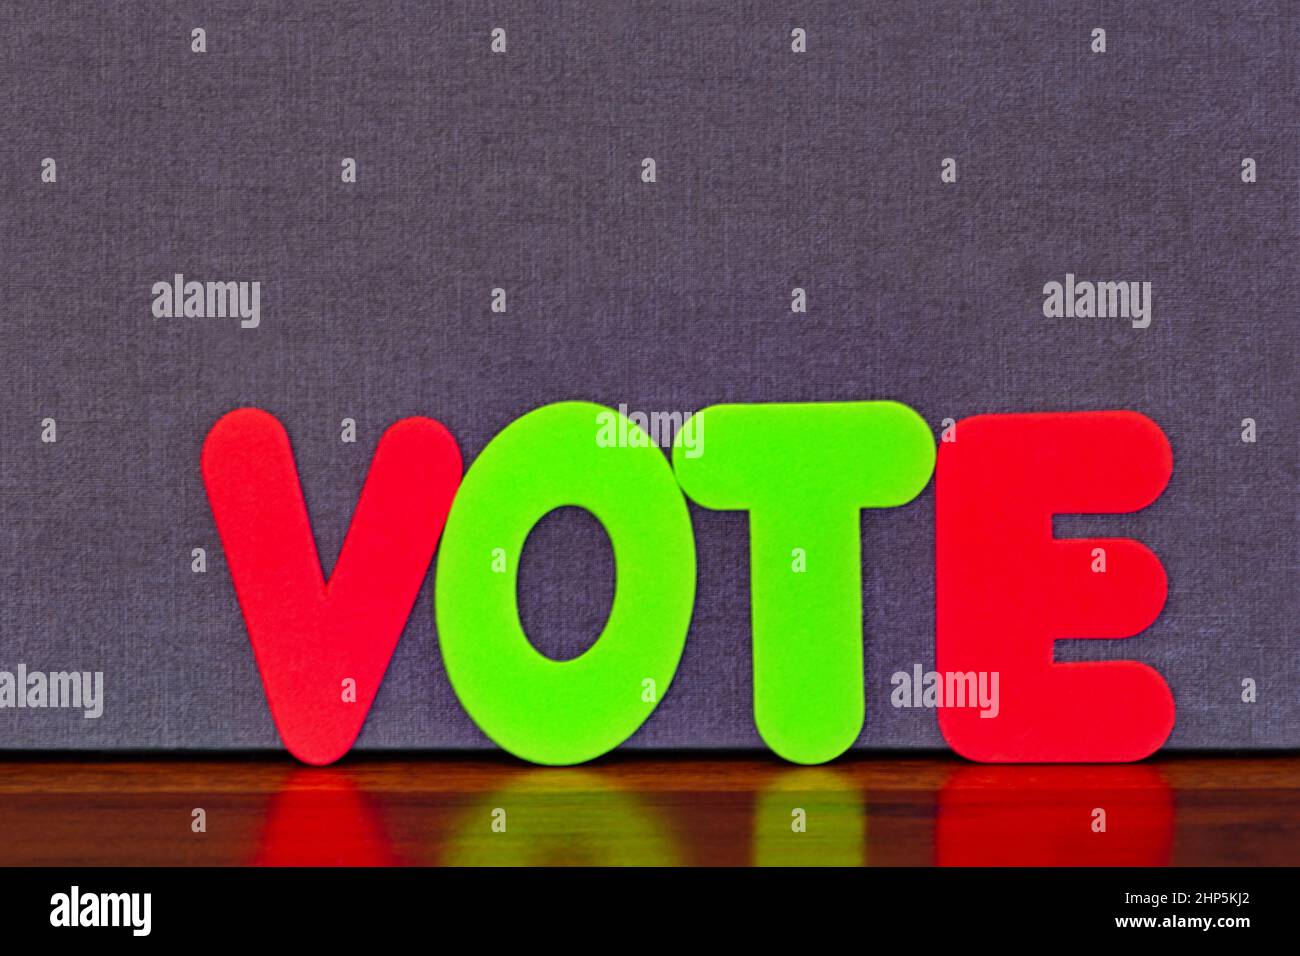 Concept image indicates VOTE in colored letters placed on wood against background with copy space Stock Photo